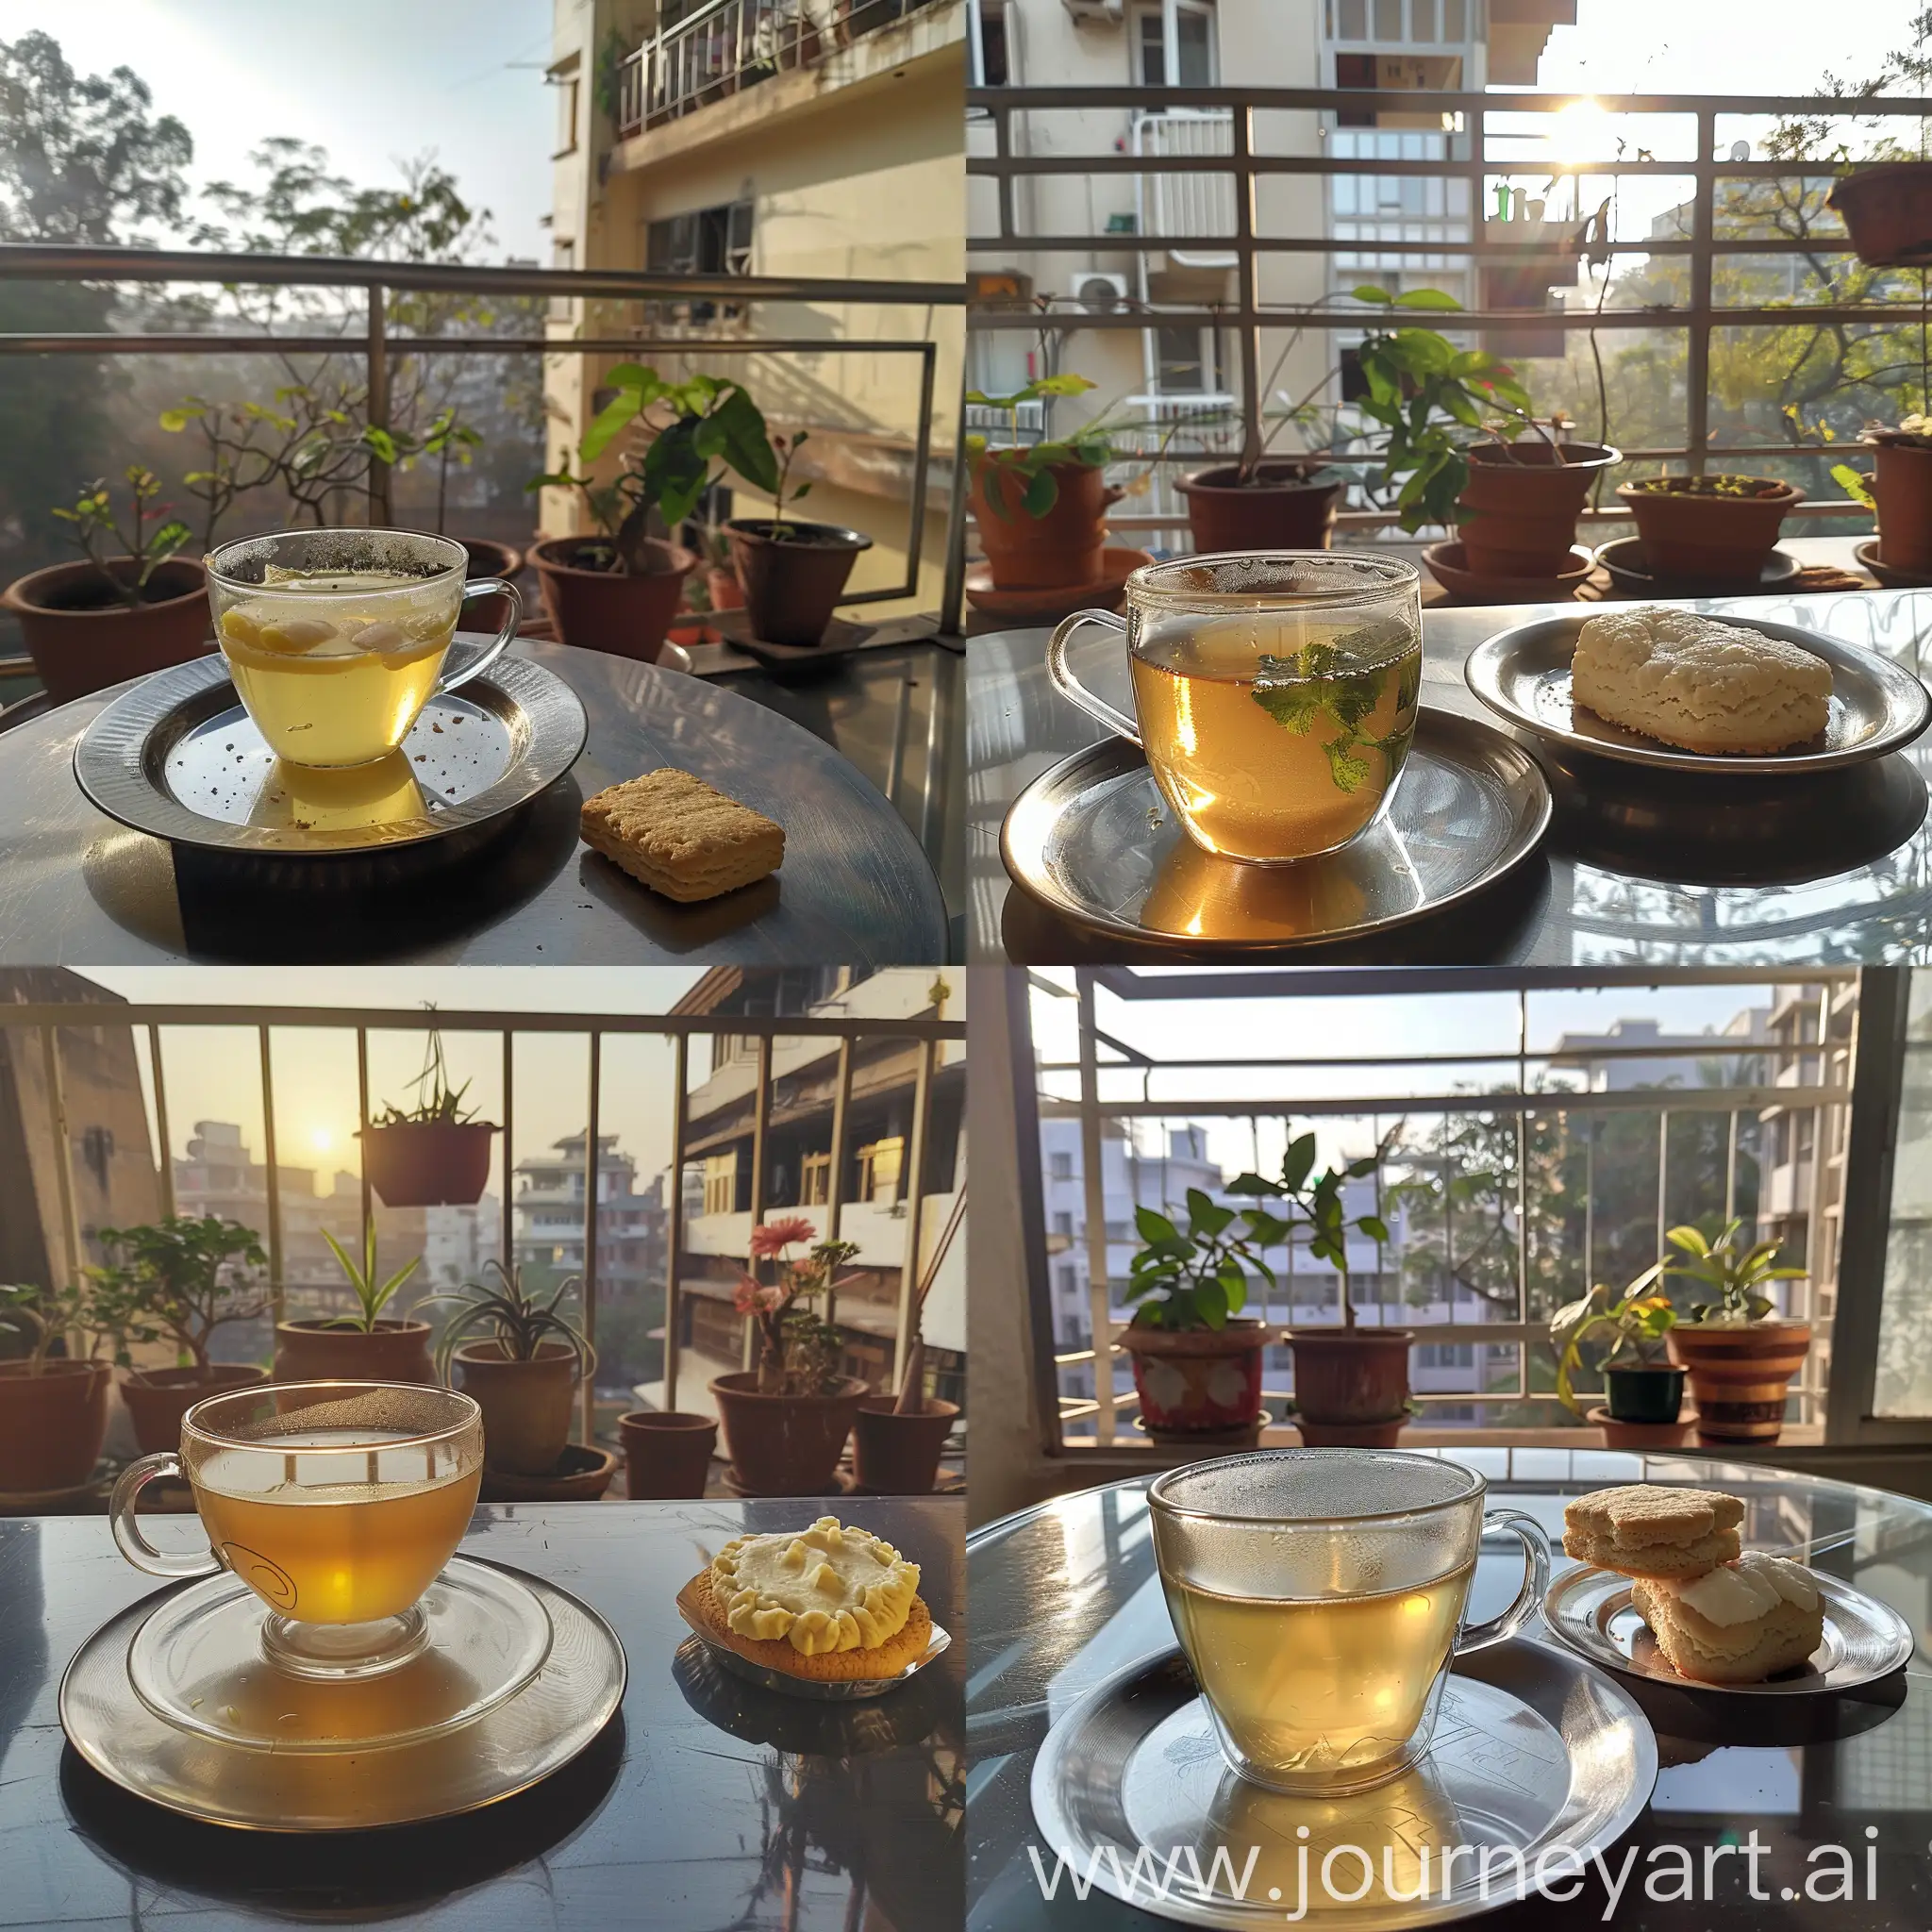 Morning-Refreshment-Enjoying-Hot-Ginger-Tea-and-Biscuit-on-Balcony-Overlooking-Sunrise